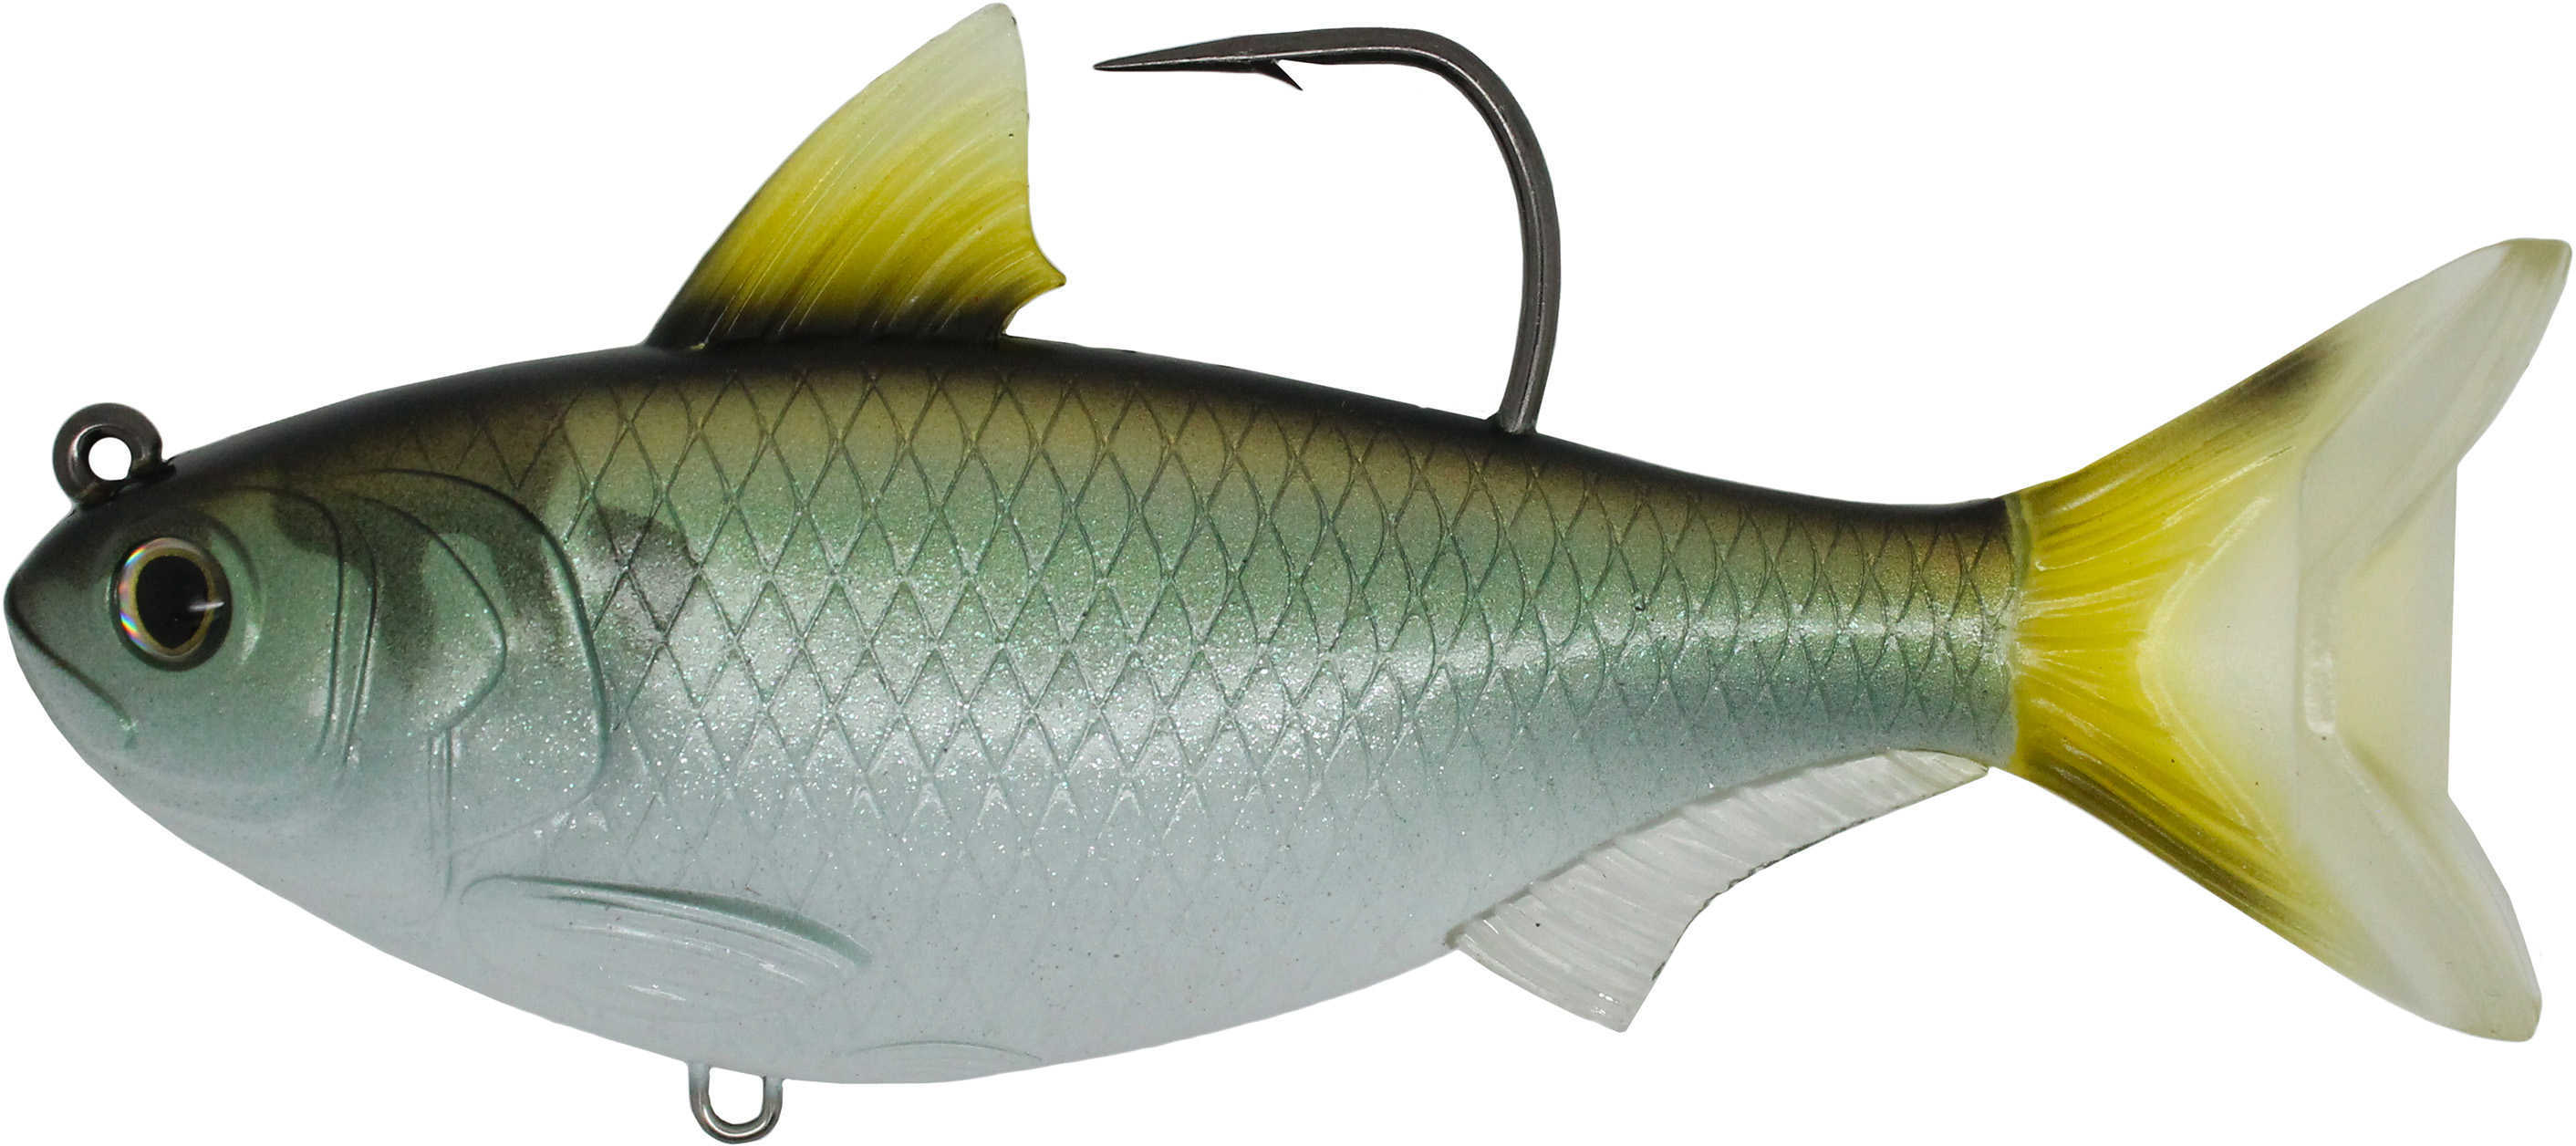 LIVETARGET Lures / Koppers Fishing and Tackle Corp Gizzard Shad Freshwater 5" 8/0 Hook Medium/Slow Sinking Green/Bronze Md: GZS125